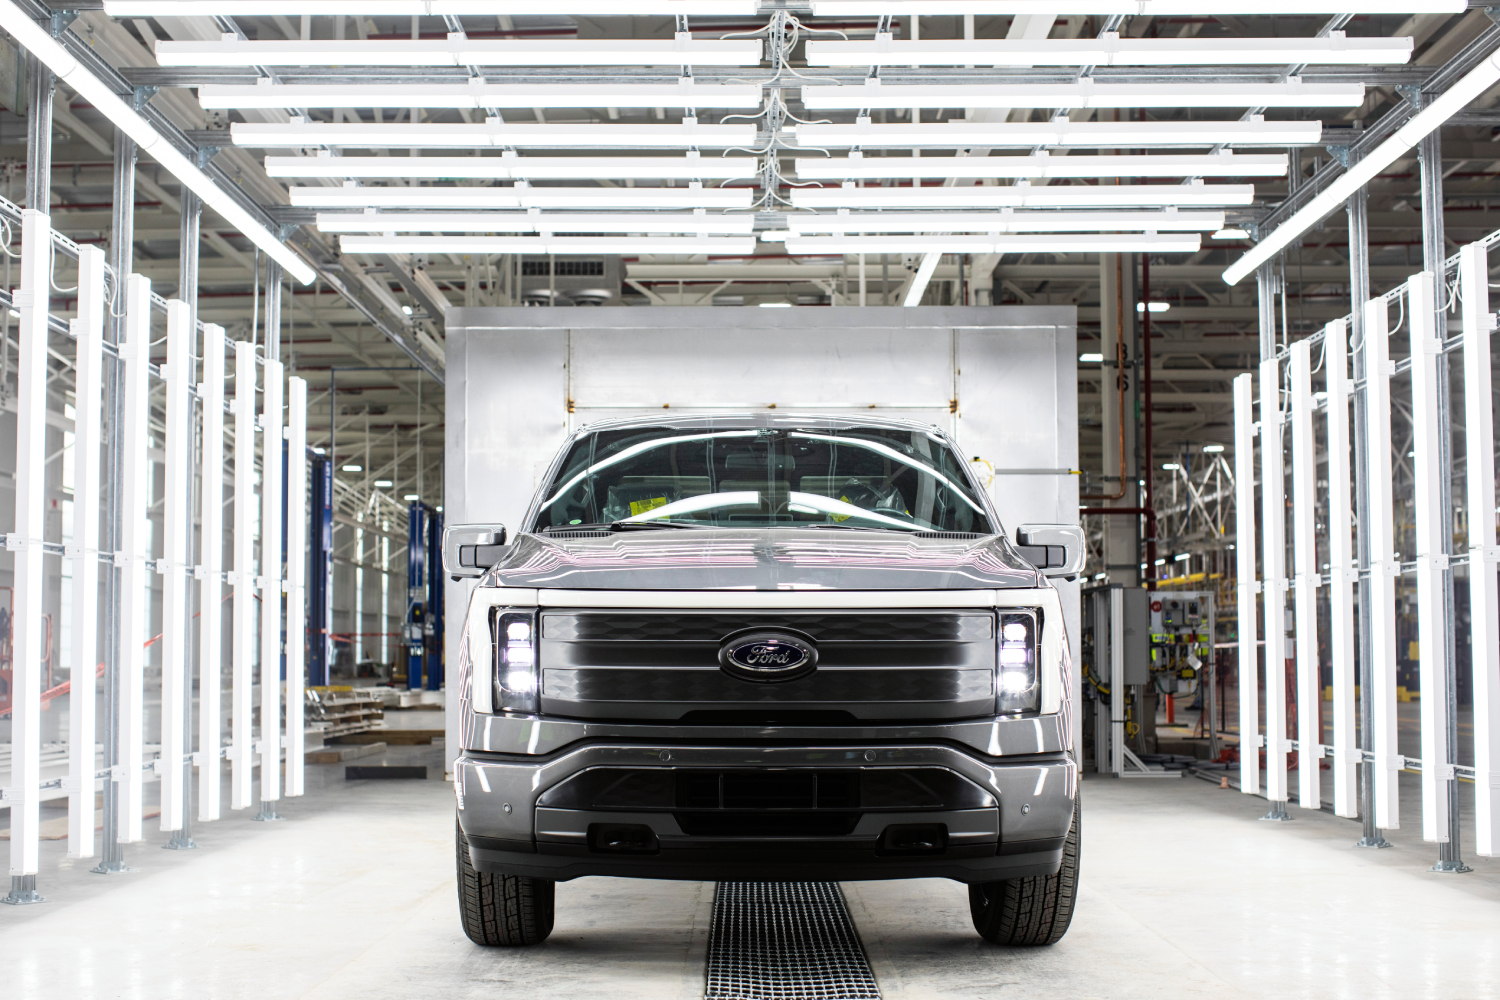 Ford F-150 Lightning electric truck buyers are reporting massive markups